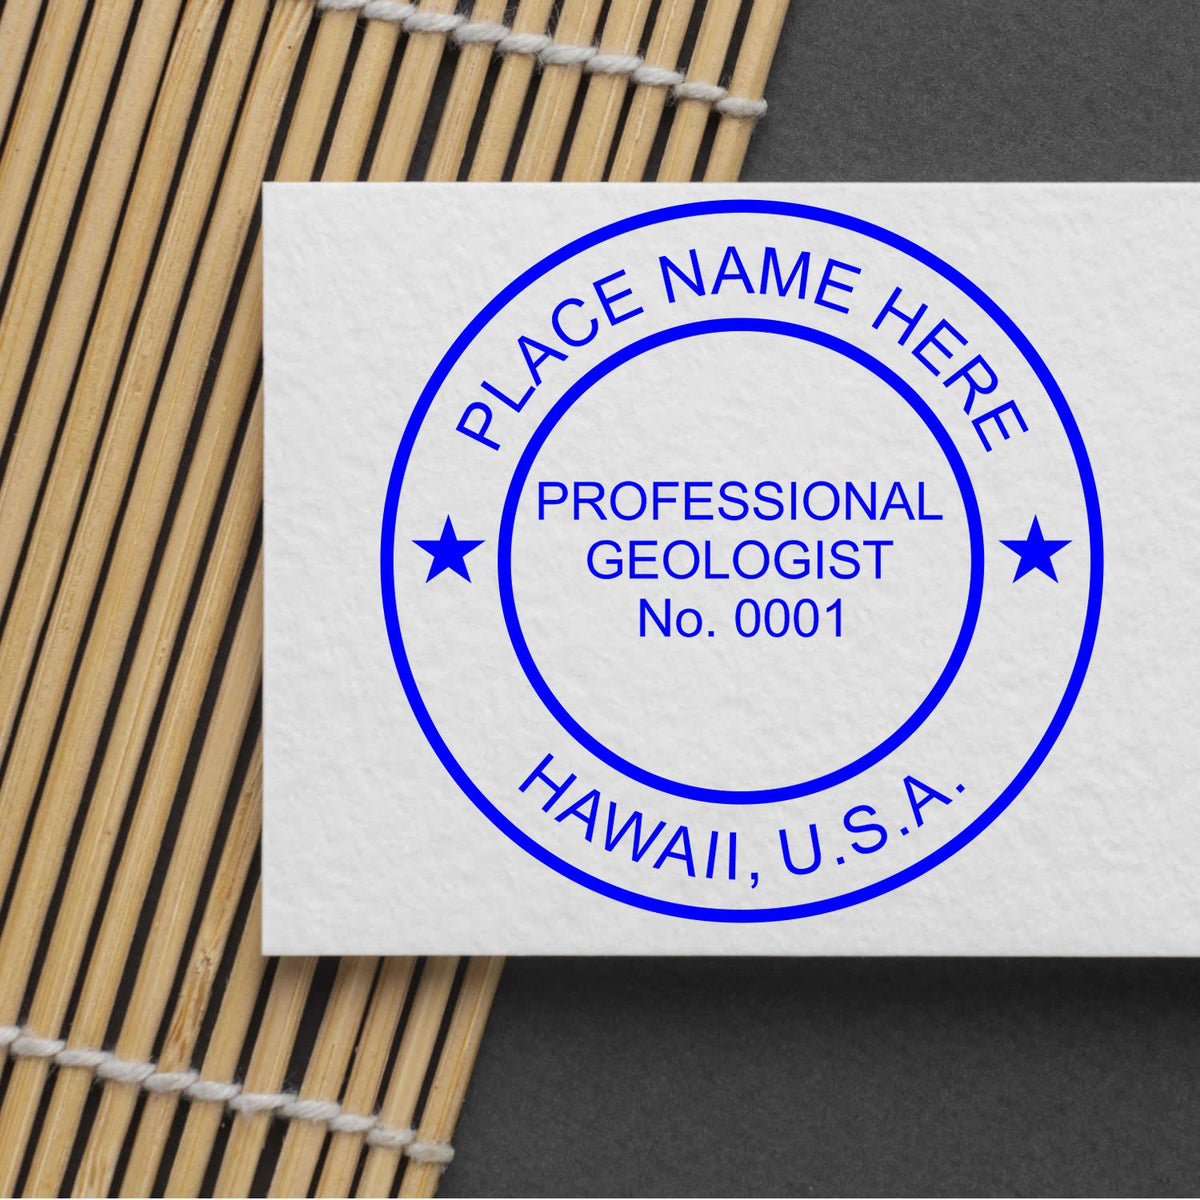 Another Example of a stamped impression of the Premium MaxLight Pre-Inked Hawaii Geology Stamp on a office form